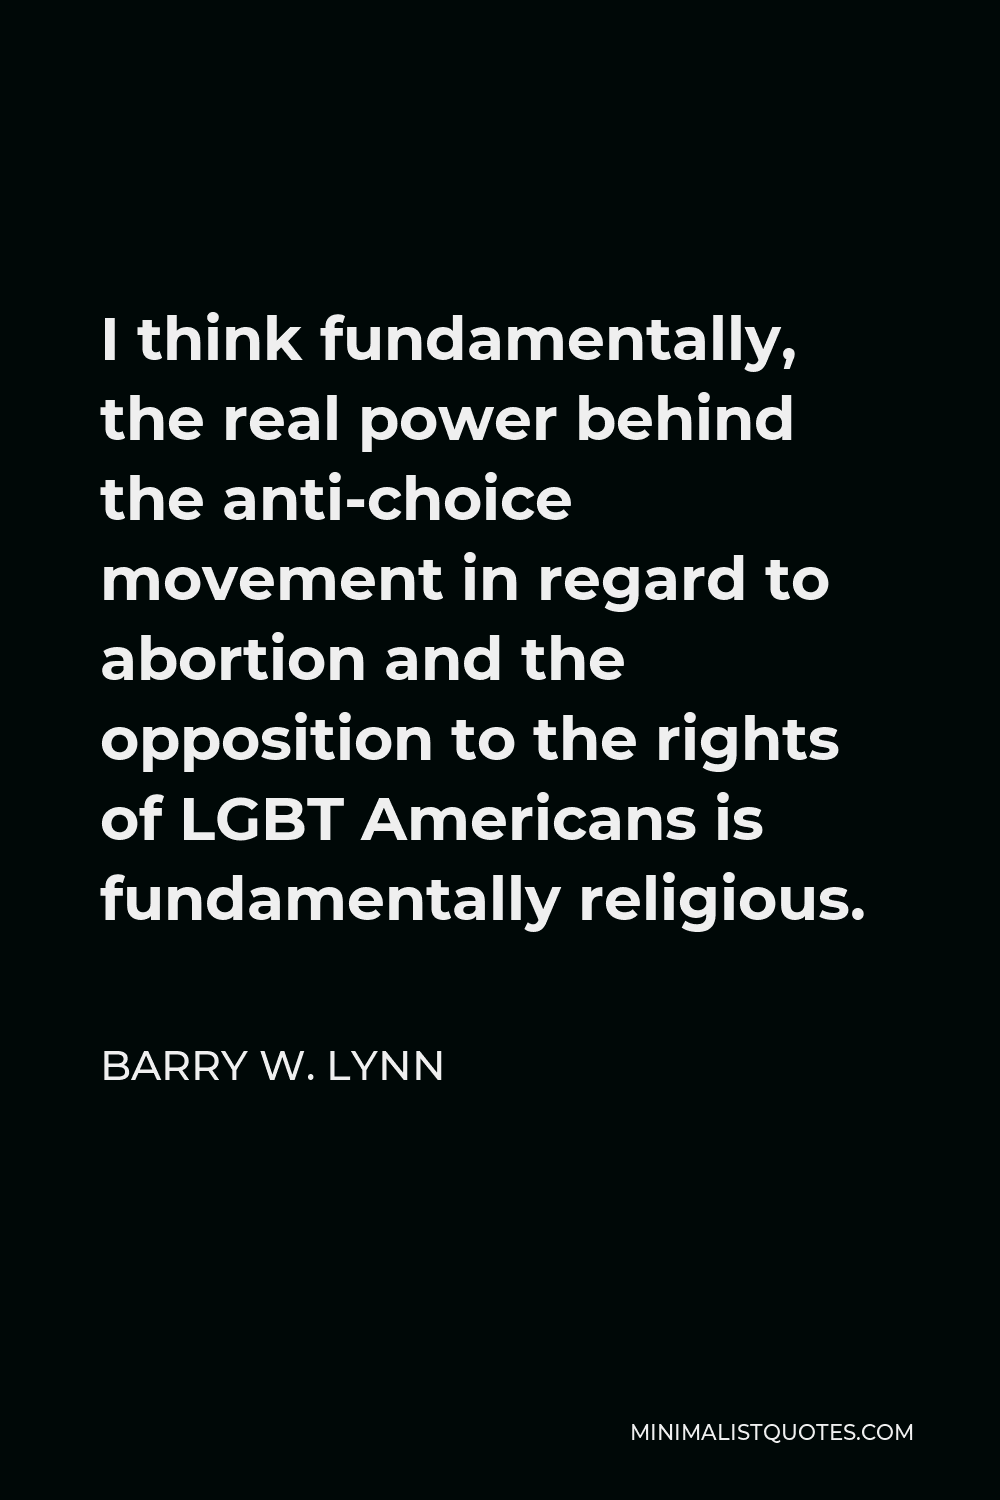 Barry W. Lynn Quote - I think fundamentally, the real power behind the anti-choice movement in regard to abortion and the opposition to the rights of LGBT Americans is fundamentally religious.